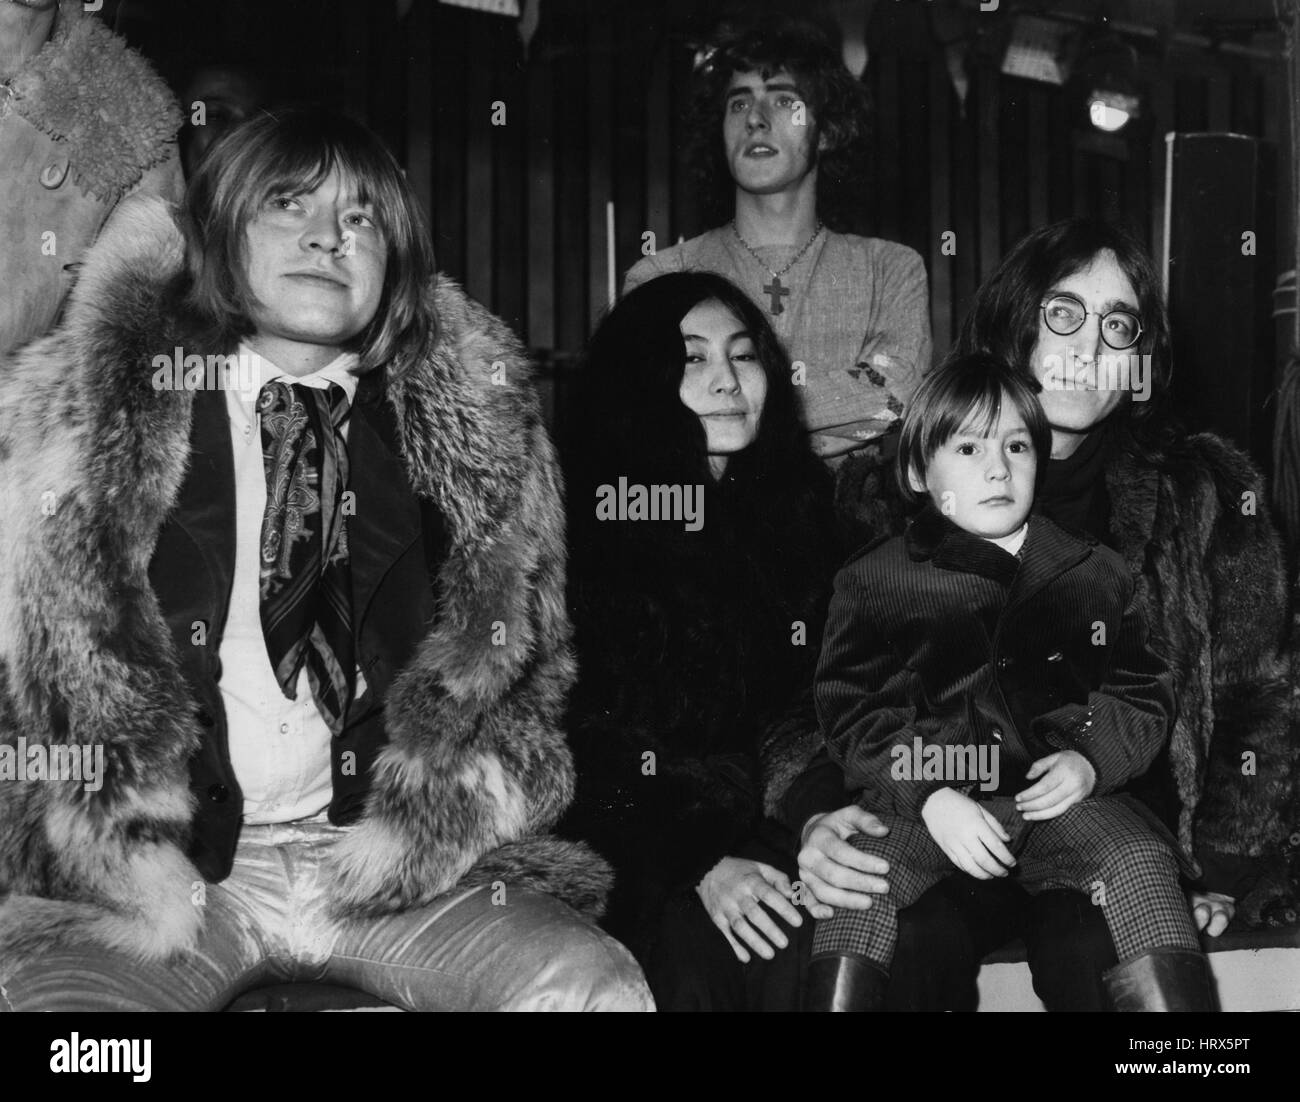 Jun. 06, 1970 - 'Stones' Circus for T.V.: The World's most contrversial pop group, 'The Rolling Stones' are to produce their own television spectacular, tentatively titled ''Rolling Stones' Rock 'n' Roll Circus Shows. The show, which will be televised early nest year, will feature the Rolling Stones, many top popstars - and clowns, animals and dwarfs from Sir Robert Fossett's Circus. The show is being filmed at Internet Studios, Wembly. Watching circus acts as the Intertel Studios - (L. to R.) Brian Jones, of the Rolling Stones, Yoko Ono, and John Lennon, with his son Julian. (Credit Image: © Stock Photo